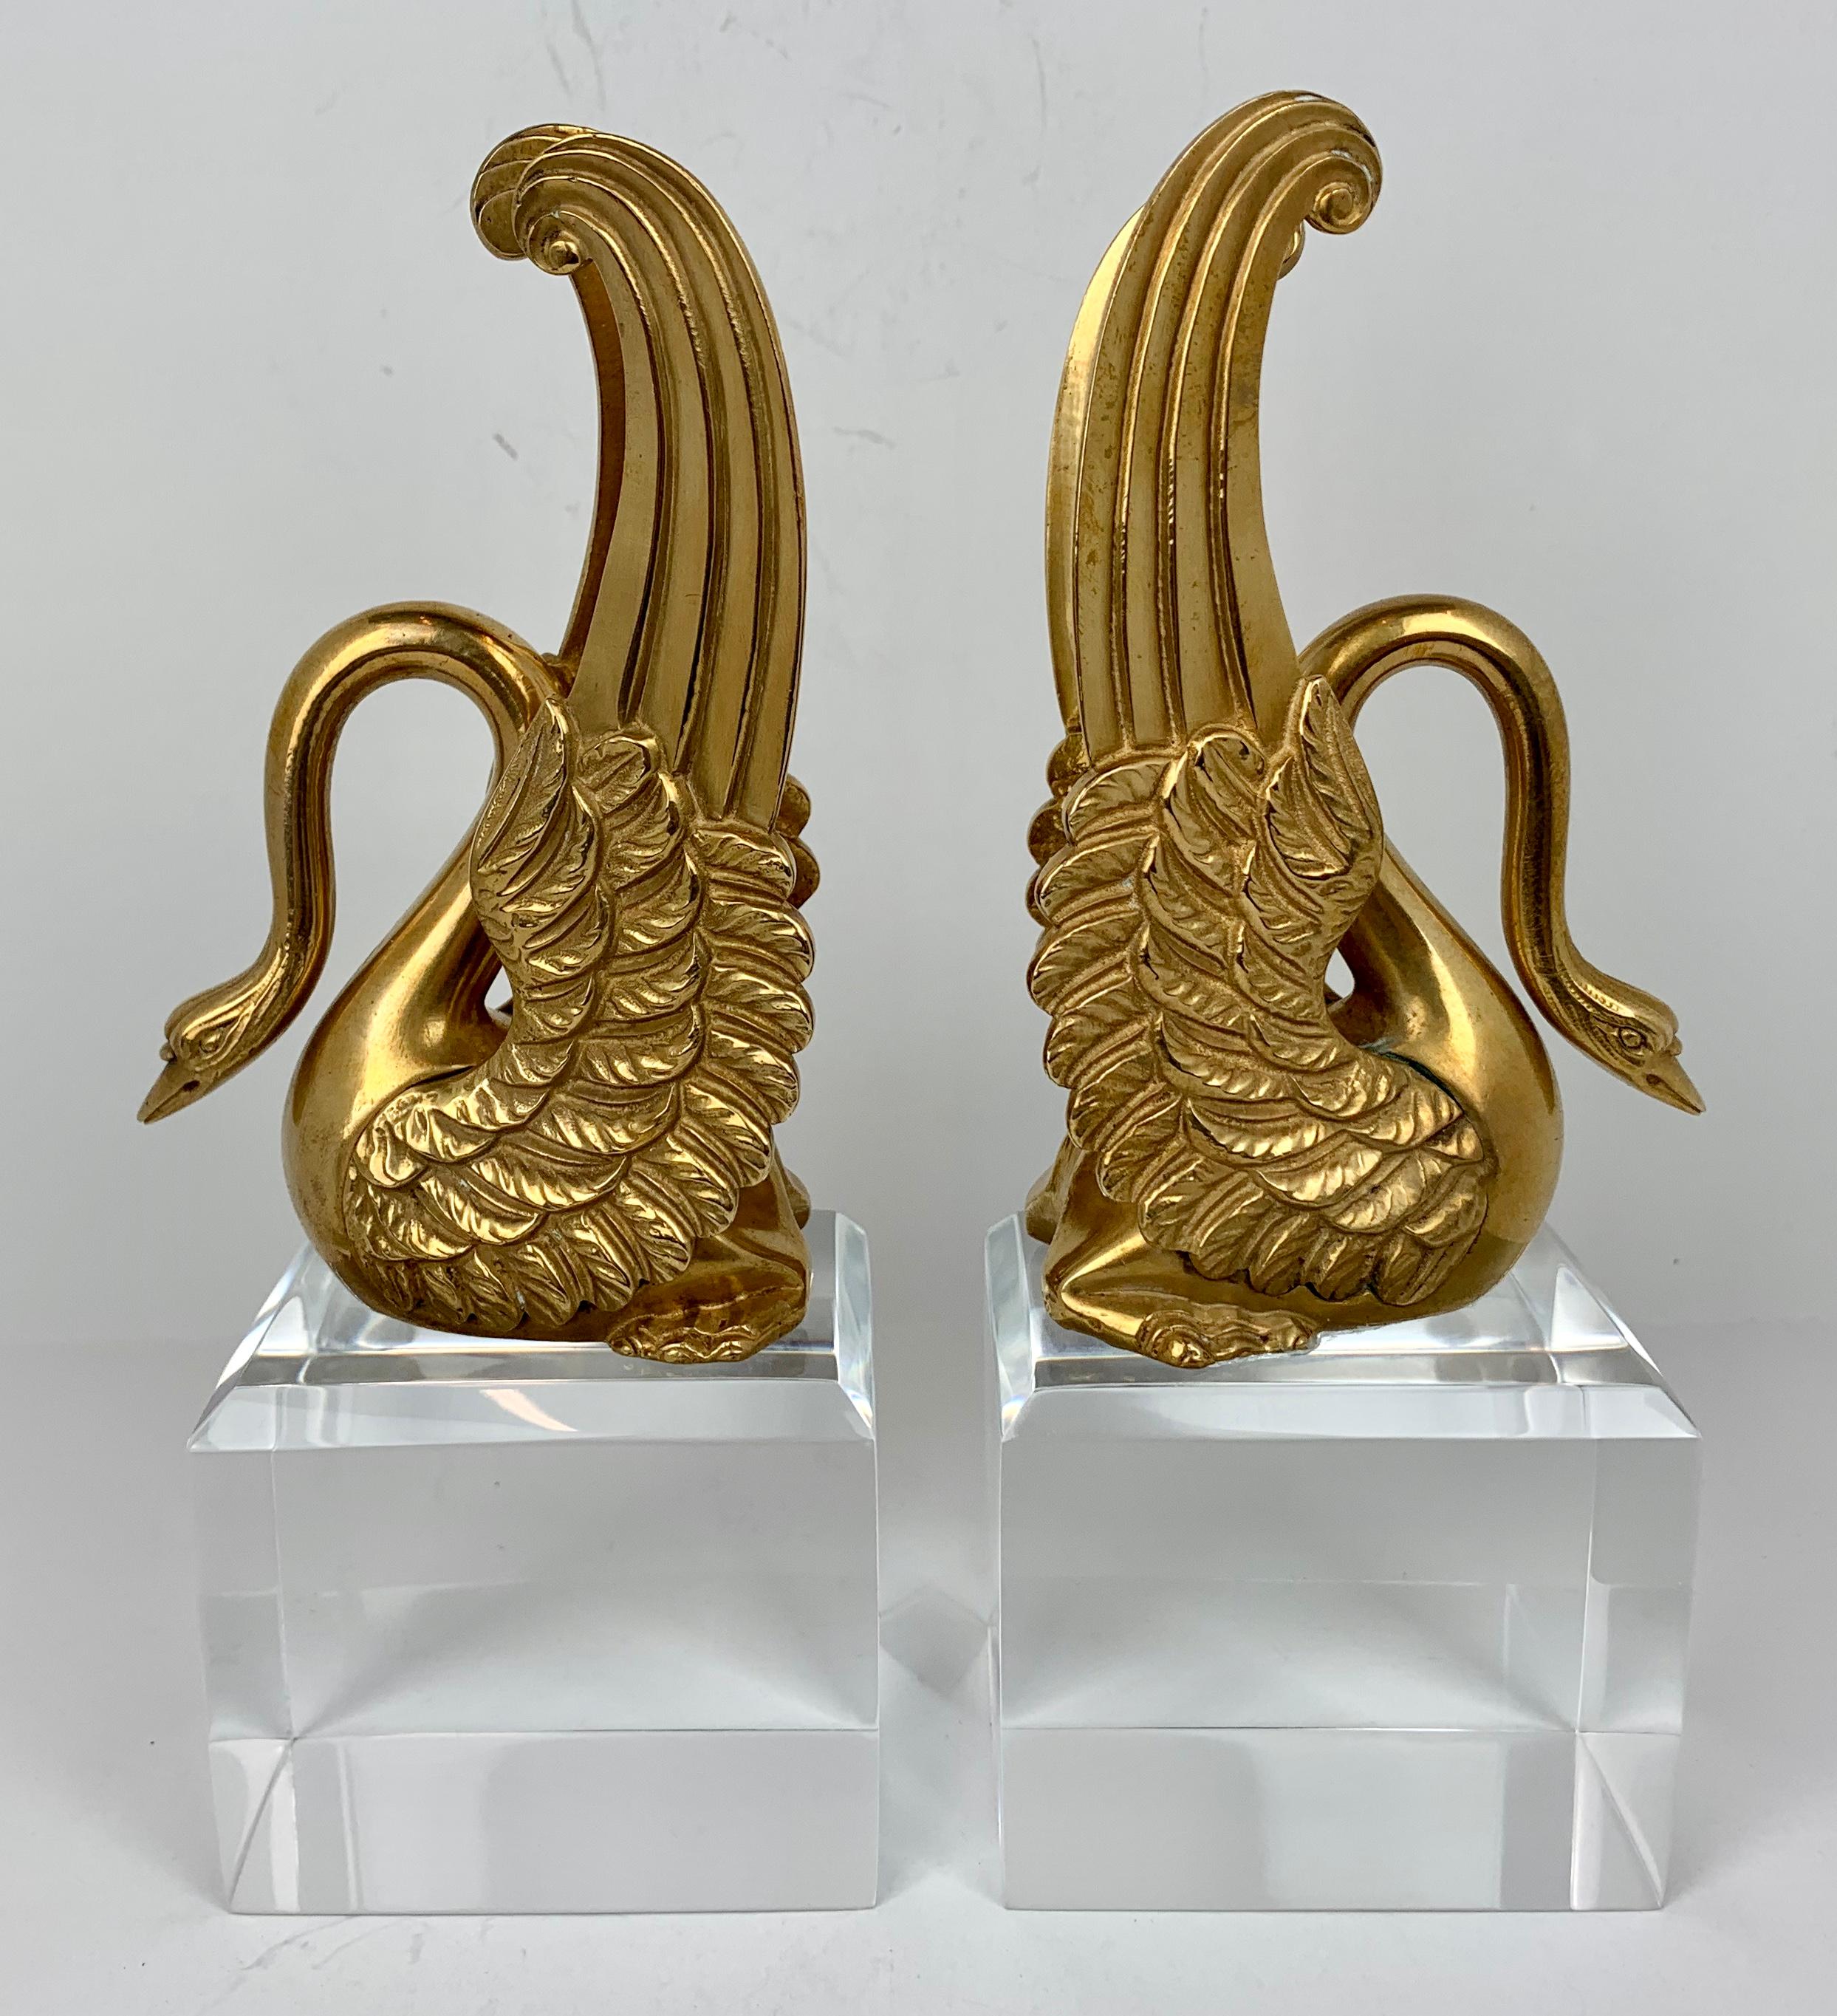 French Bronze Doré Empire Swans Custom Mounted on Lucite Plinths